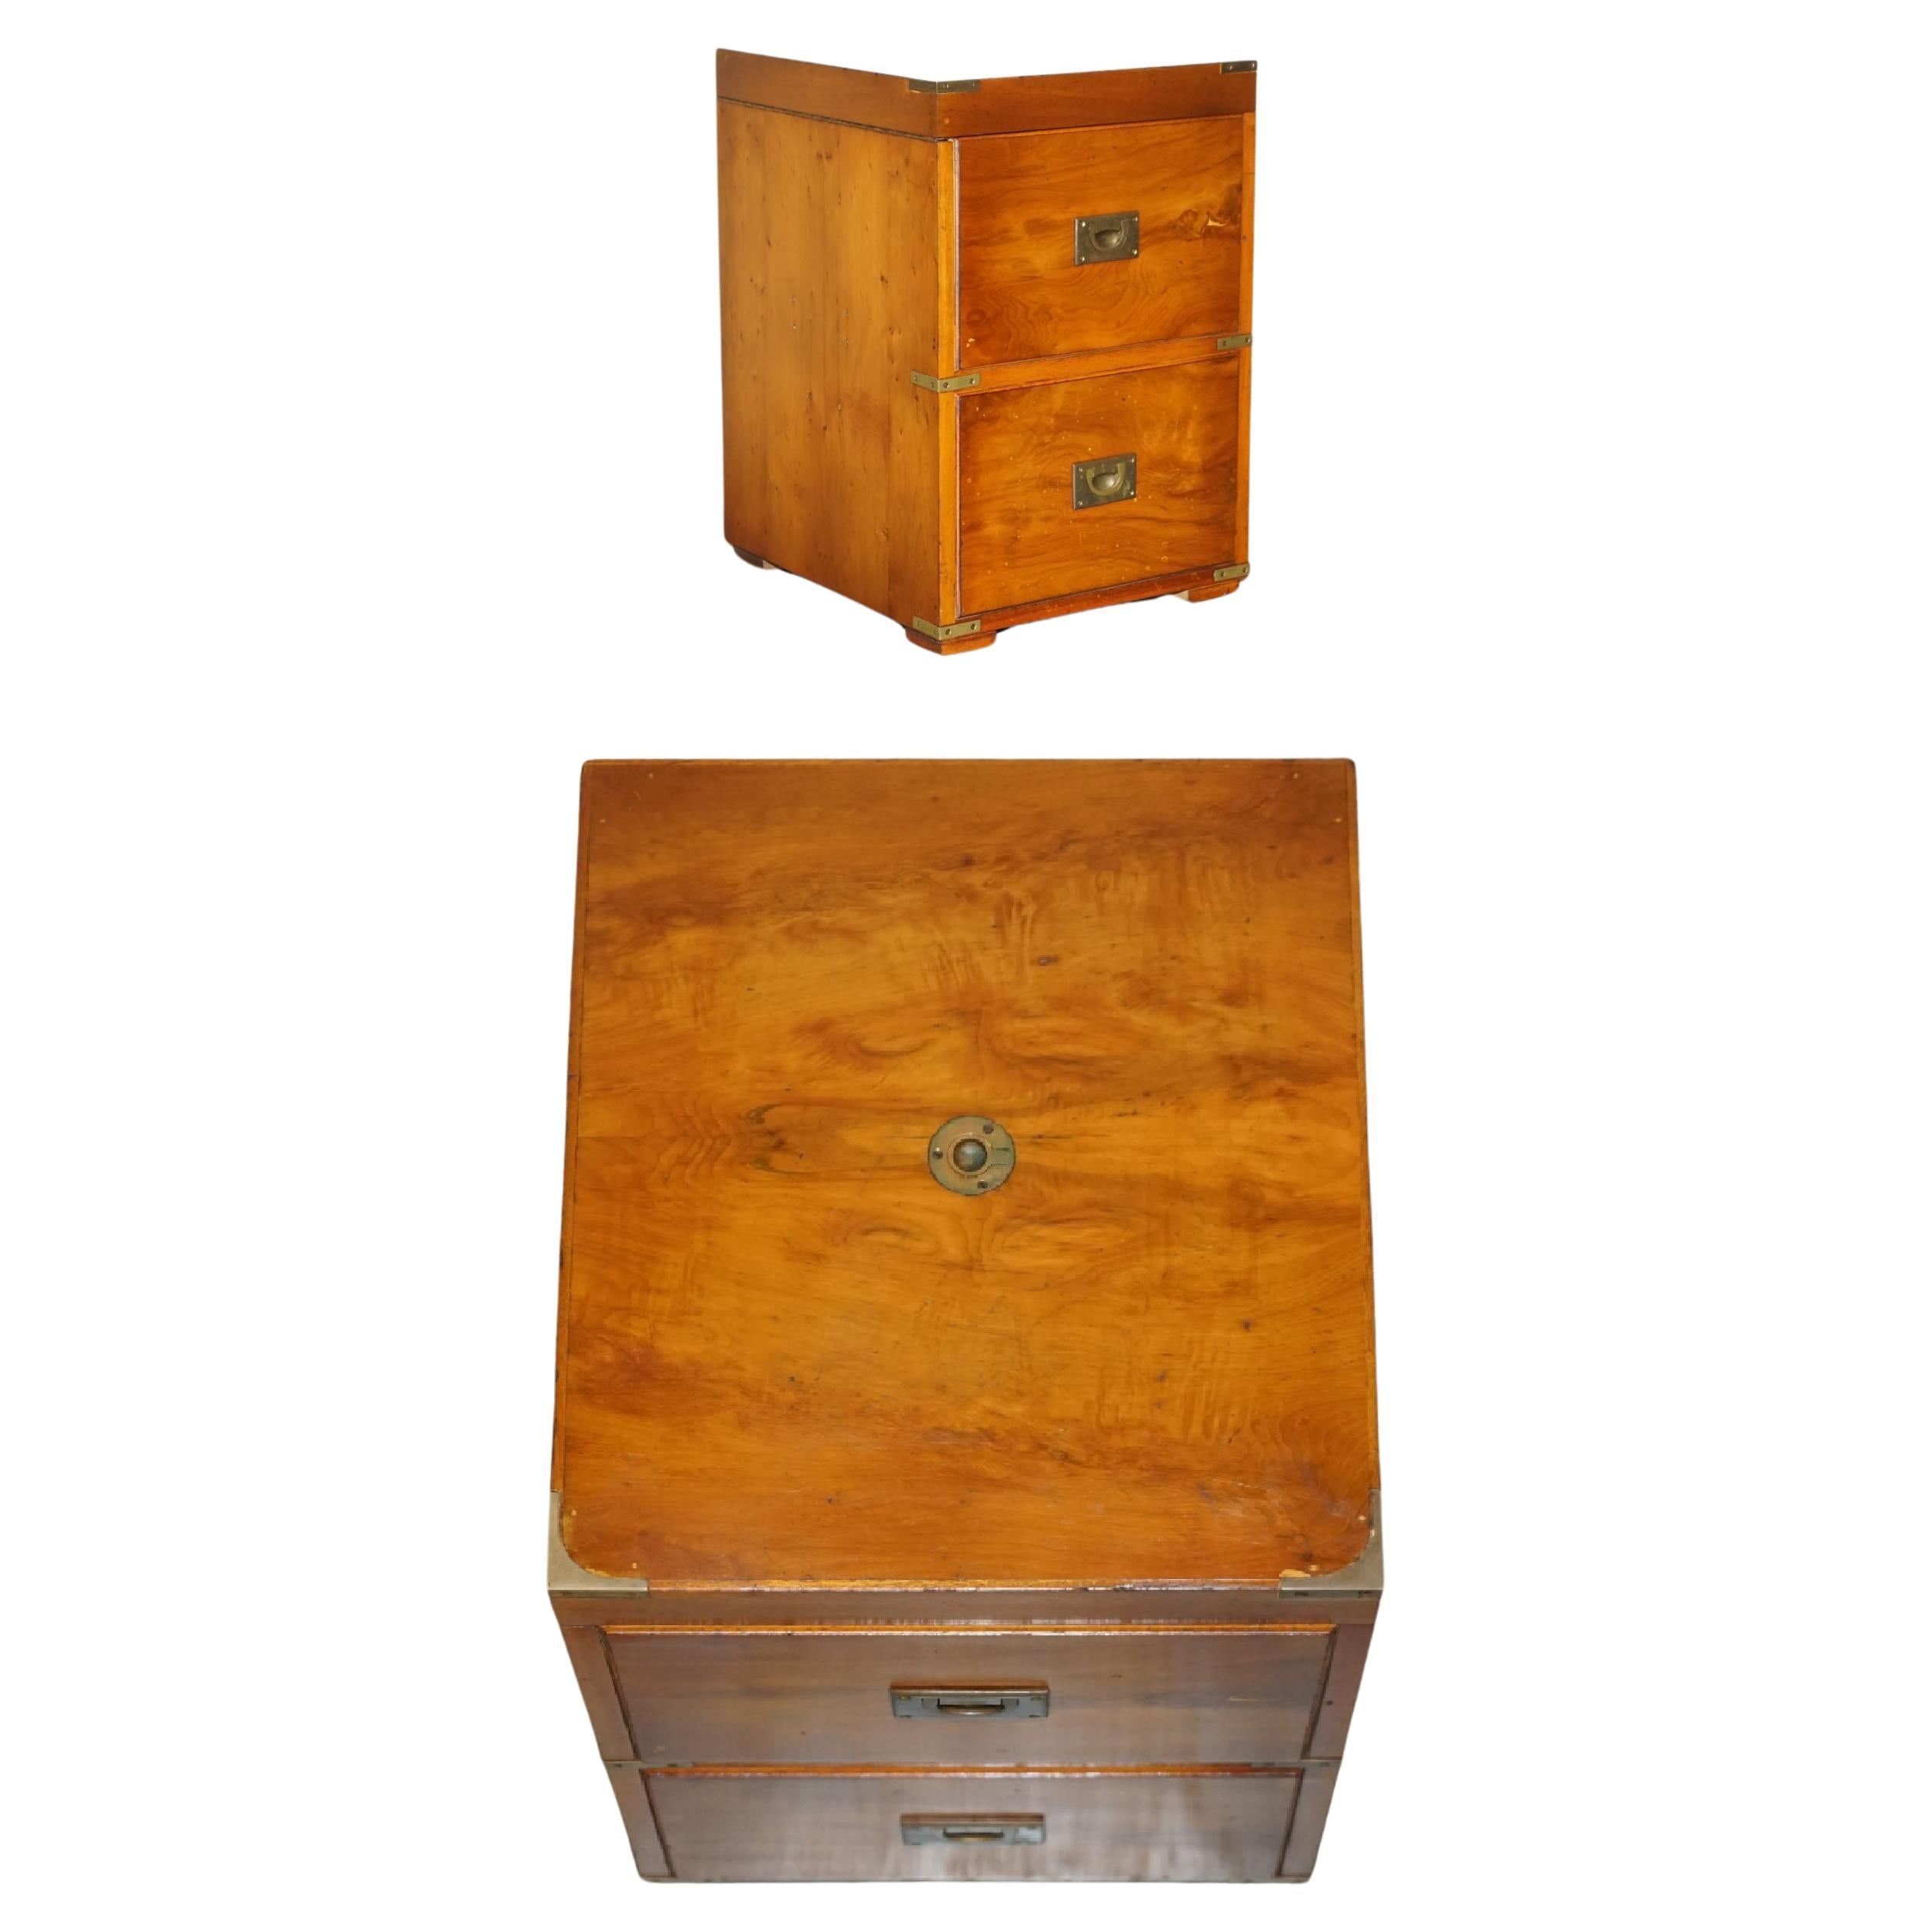 BURR YEW & ELM WOOD MiLITARY CAMPAIGN DRINKS CABINET INSIDE A SIDE TABLE